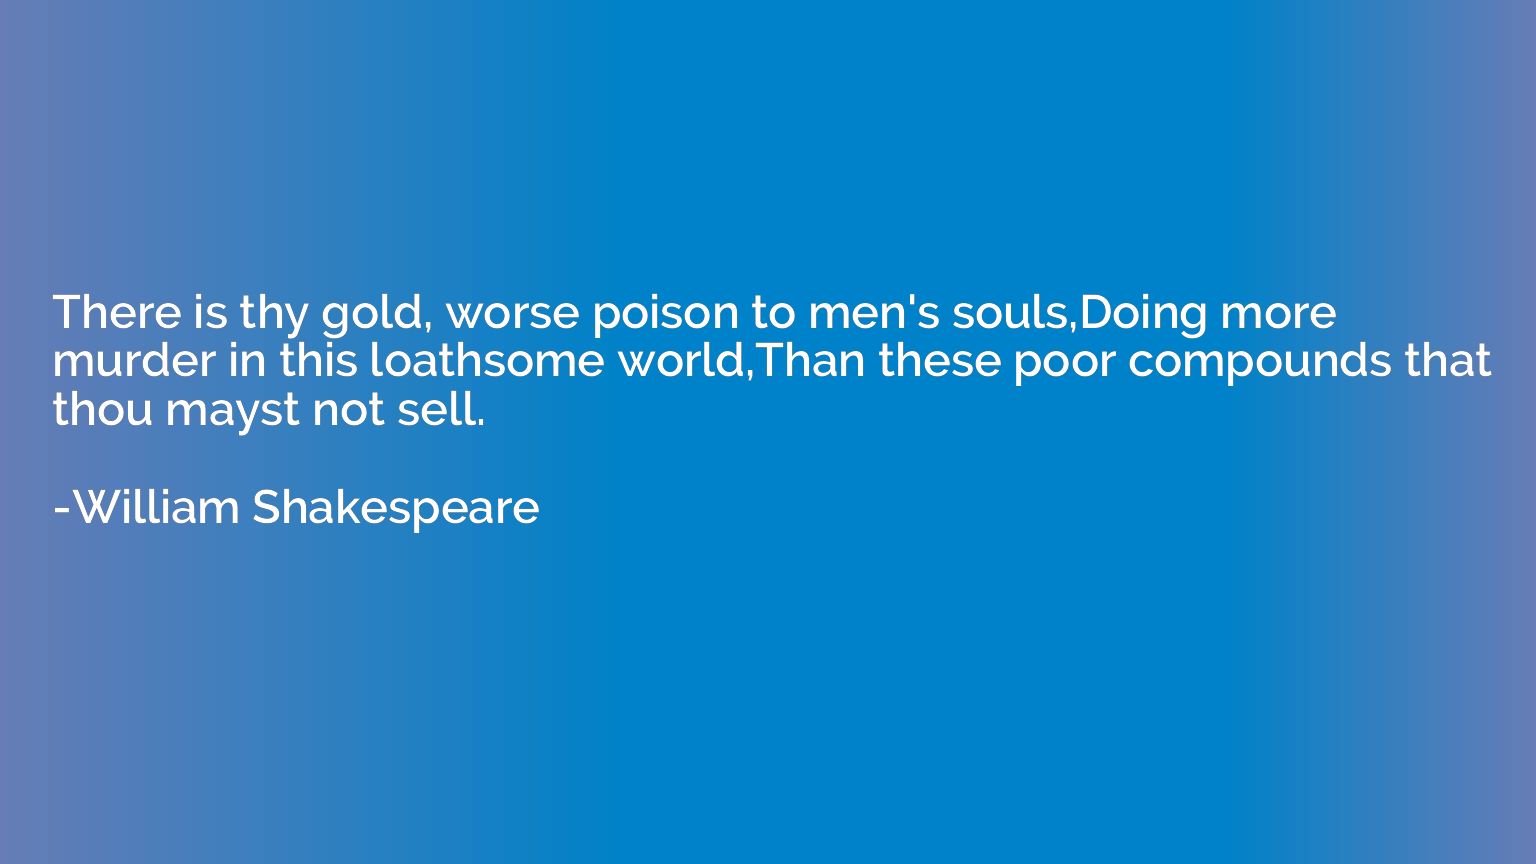 There is thy gold, worse poison to men's souls,Doing more mu